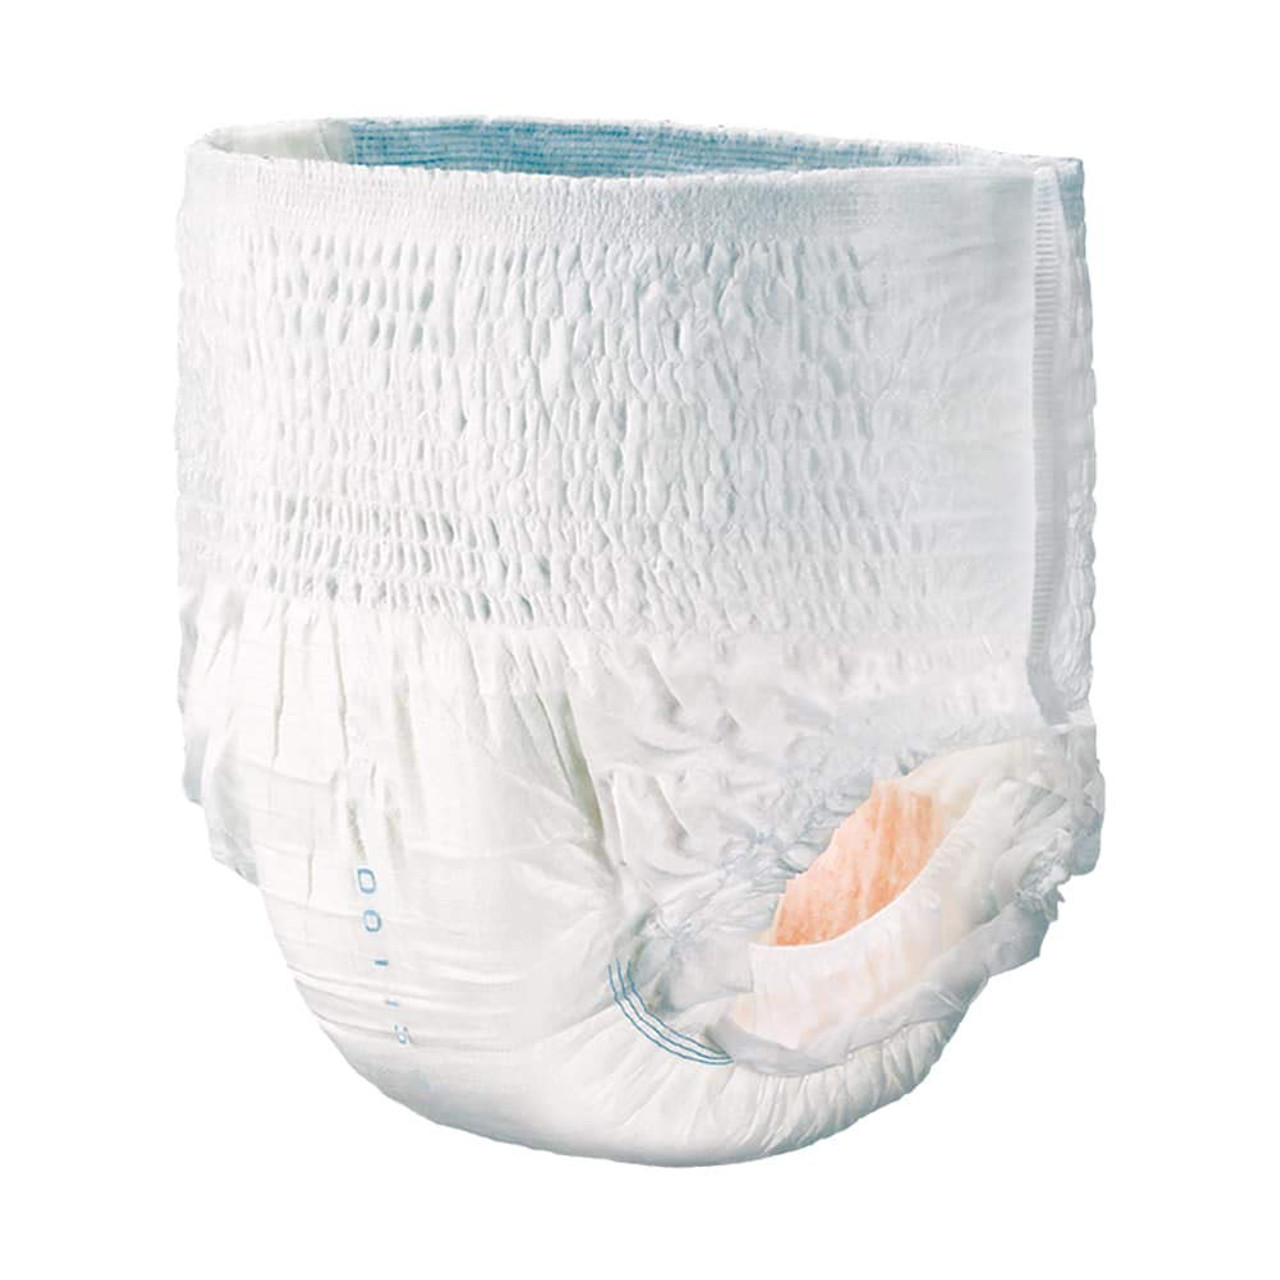 Tranquility 2114 Tranquility Premium OverNight Disposable Absorbent Underwear Small, 4x20s